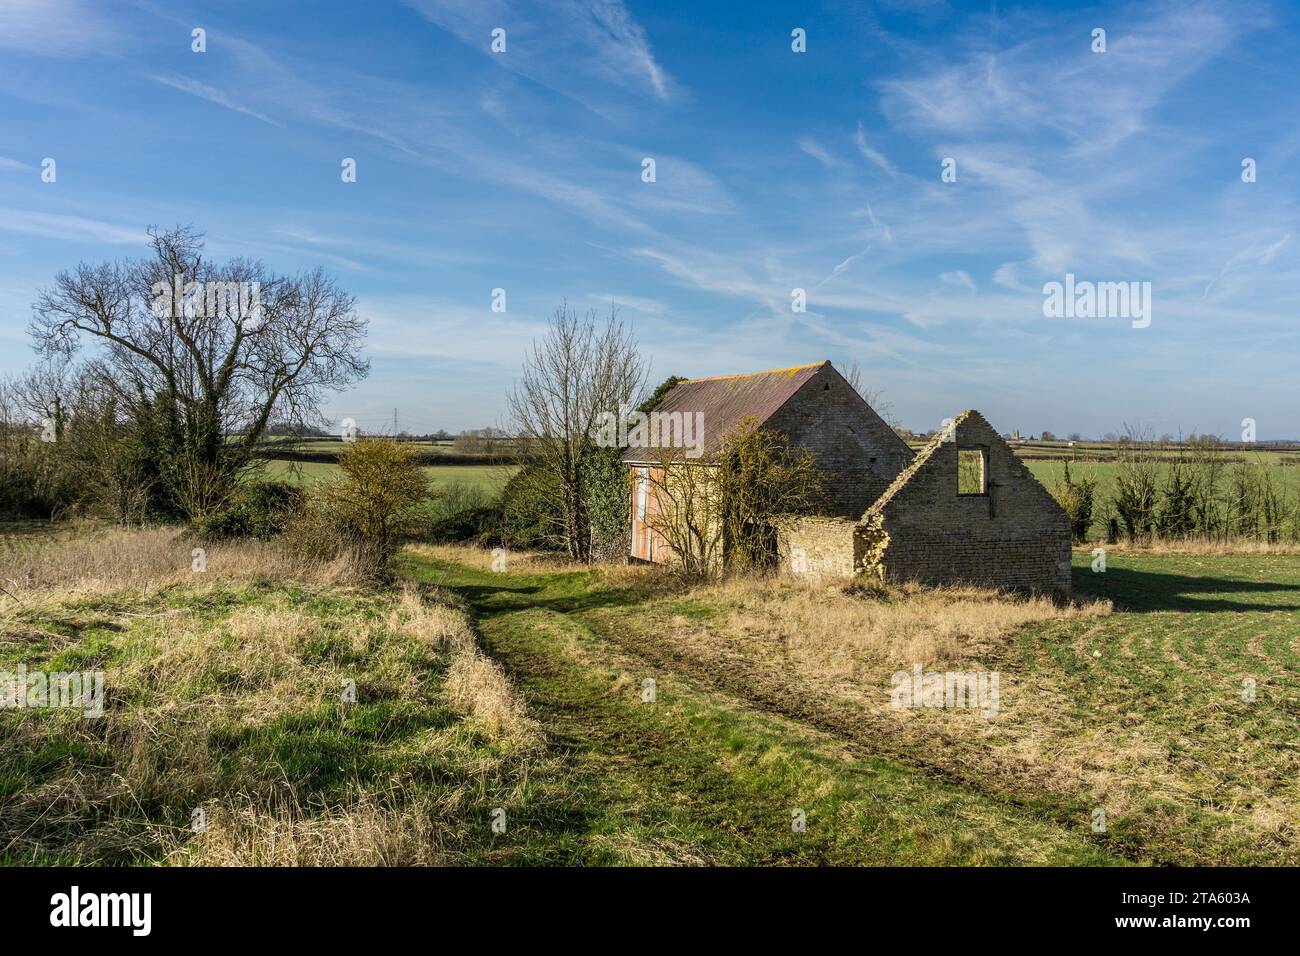 Semi derelict old stone barn in the fields outside the village of Easton Maudit, Northamptonshire, UK Stock Photo